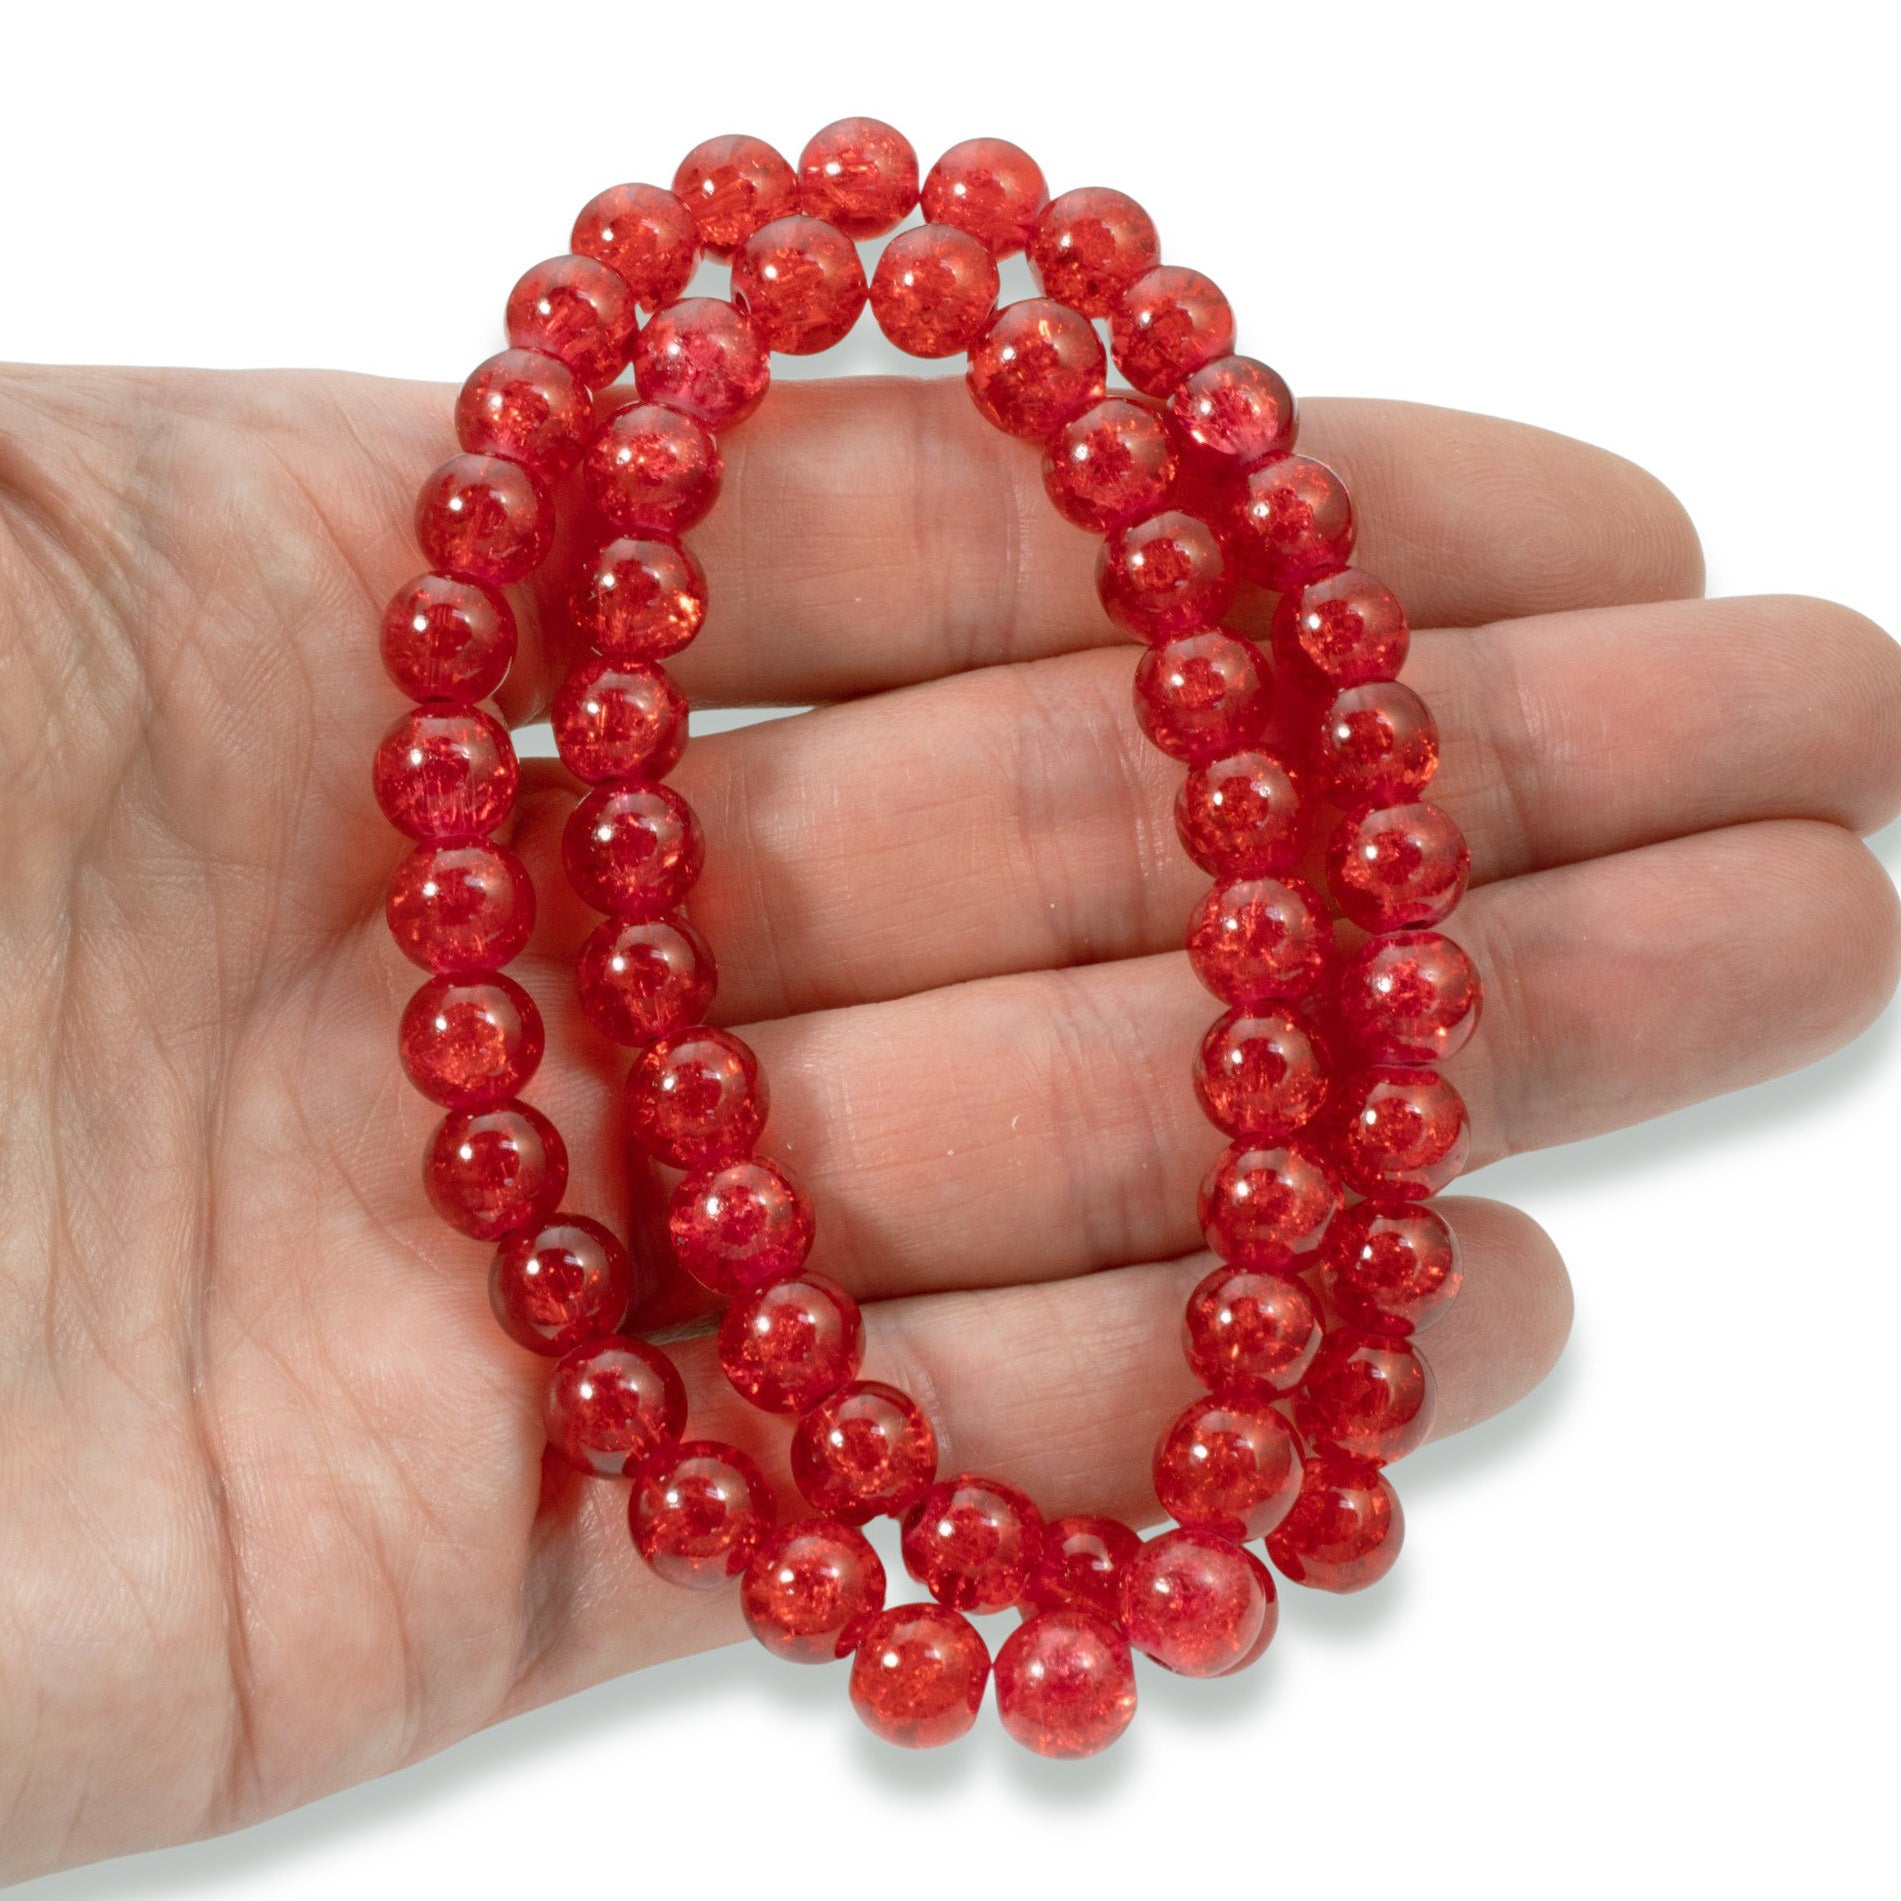  Red Round Glass Beads, Sizes 8mm, 6mm and 4mm. Not Painted or  Coated, Goes Well with Cat's Eye Beads. Craft, Jewelry and DIY Projects.  (8mm - 50 Beads)